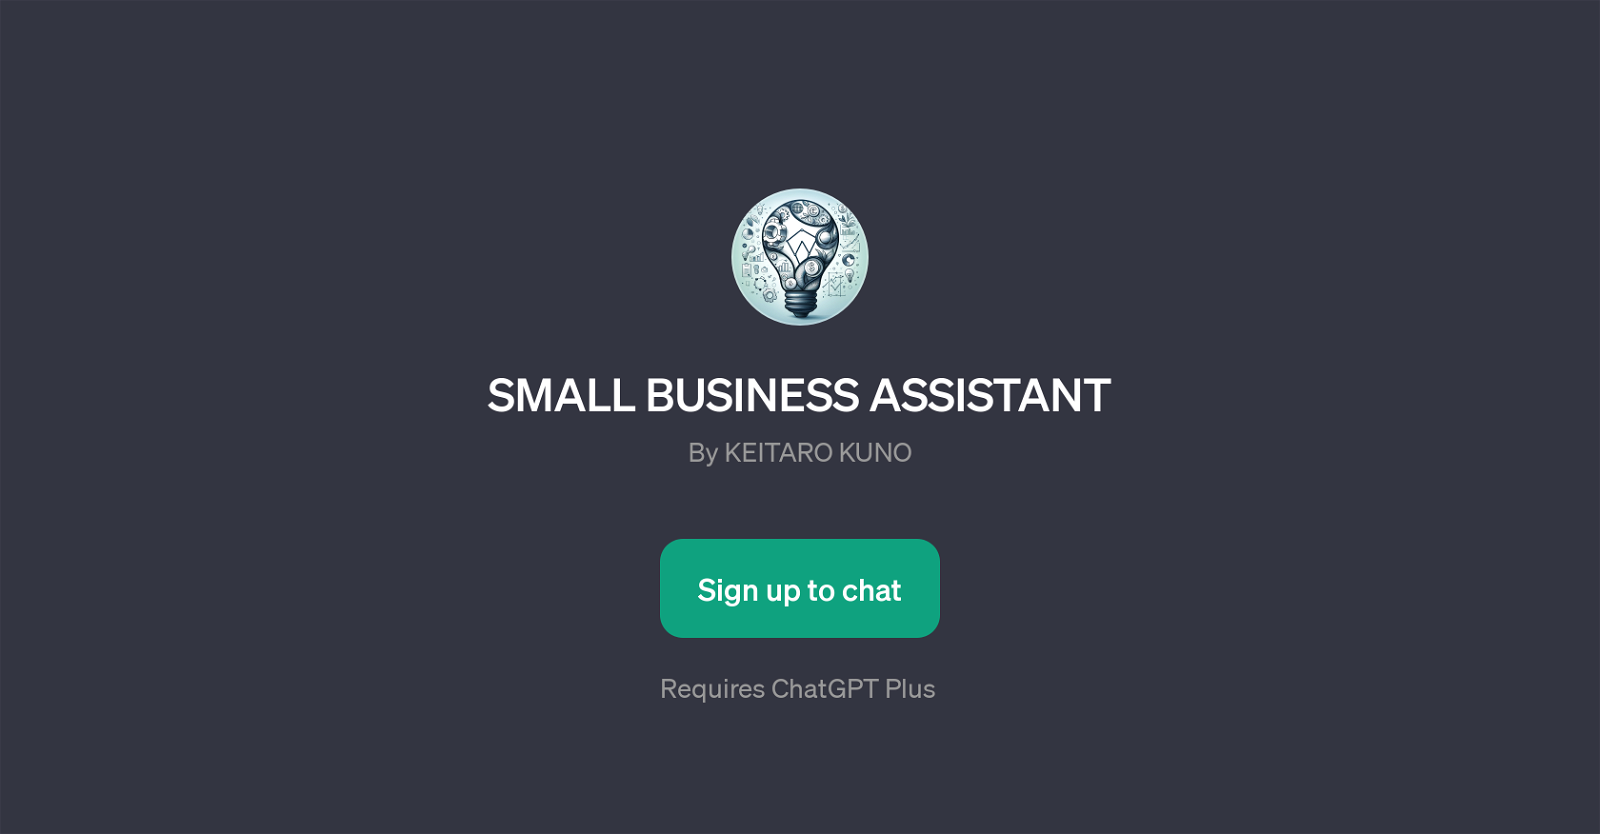 SMALL BUSINESS ASSISTANT website